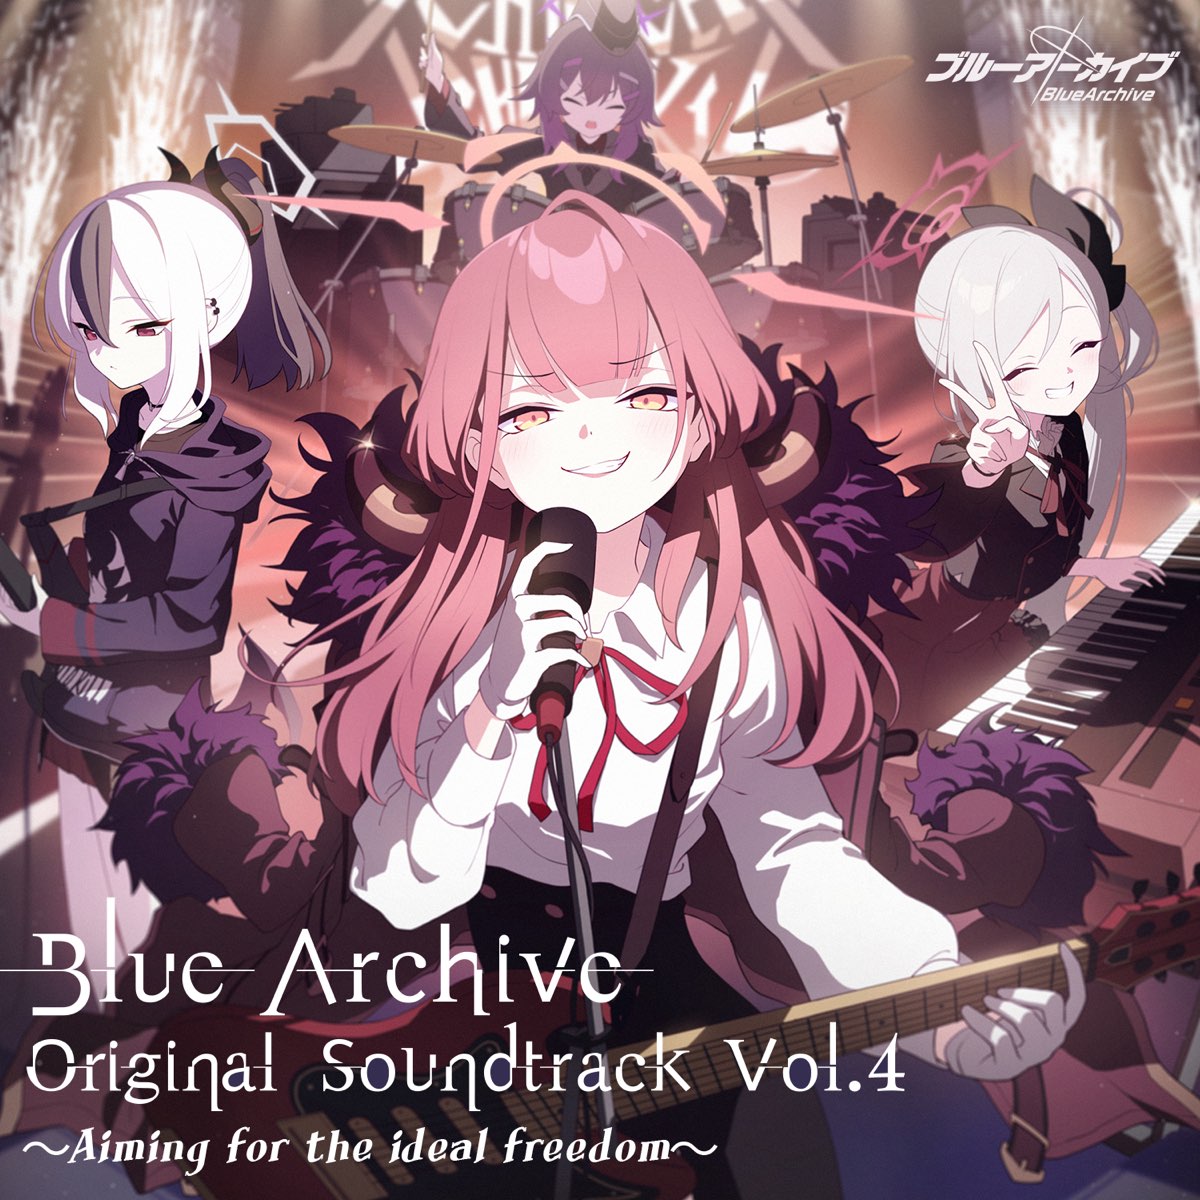 ‎Blue Archive Original Soundtrack Vol.4 ～Aiming for the ideal freedom ...